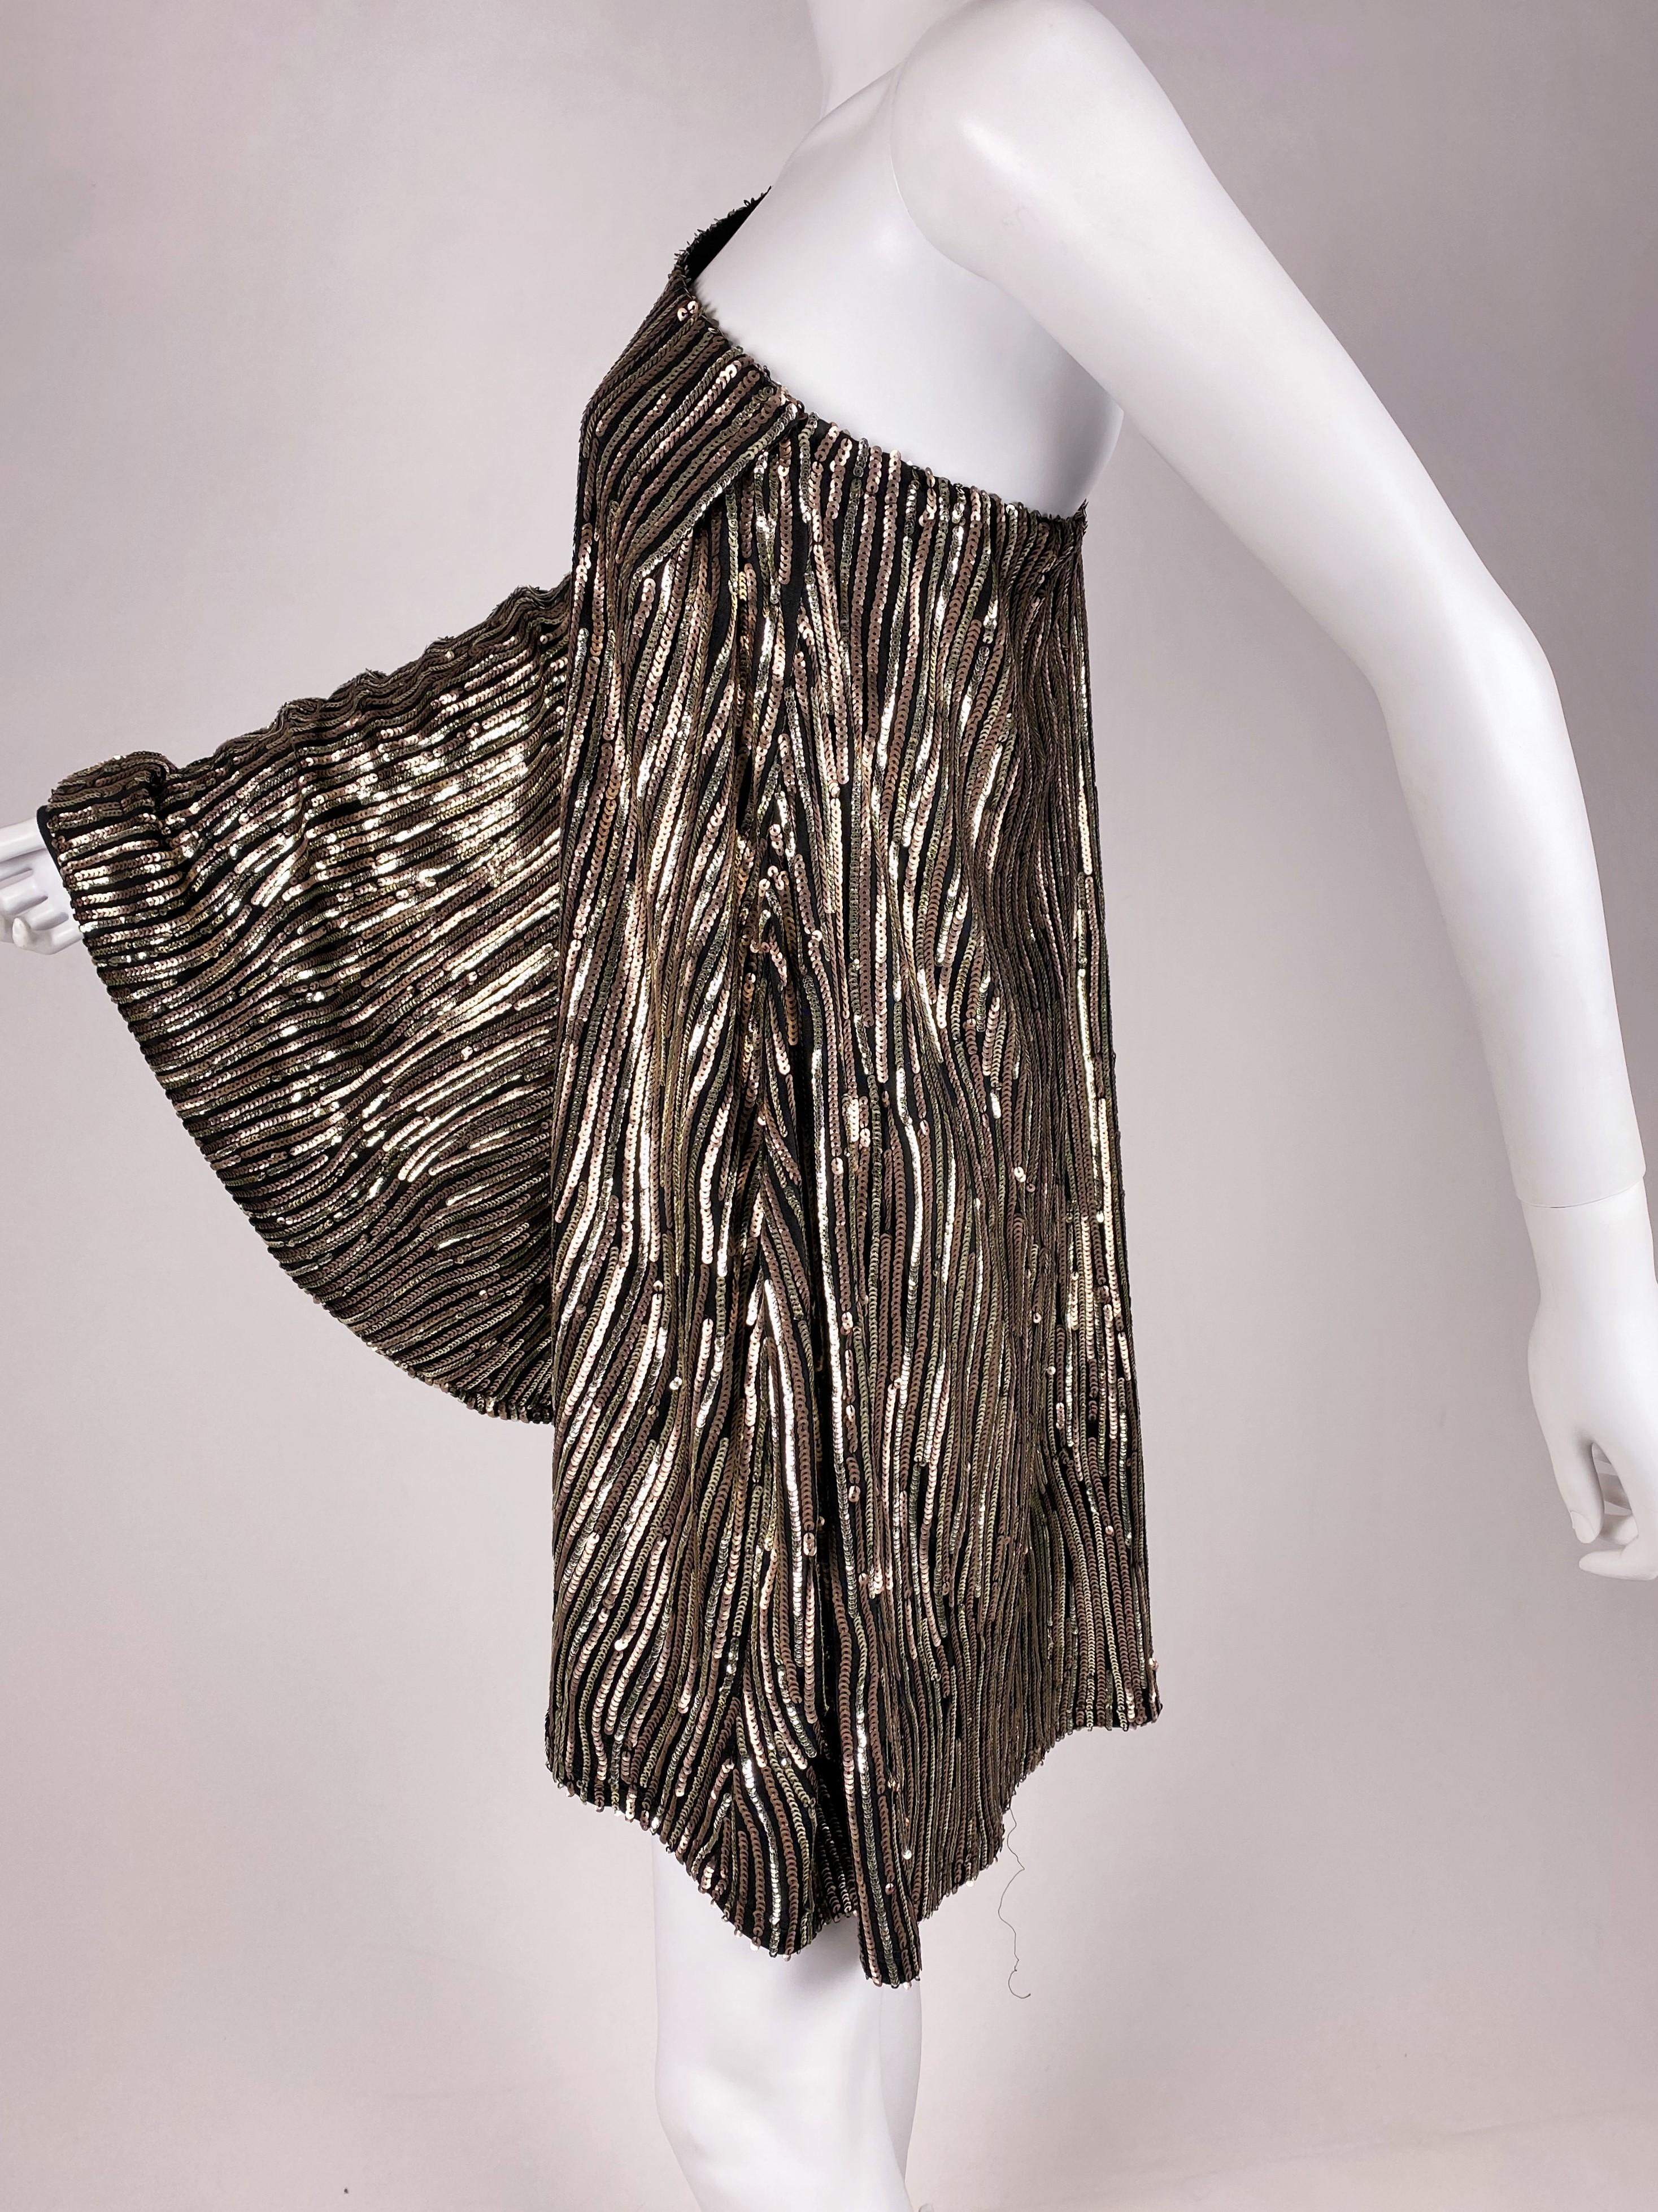 A Sequin top or mini-dress with bat handle For a Party - France Circa 1980 For Sale 8